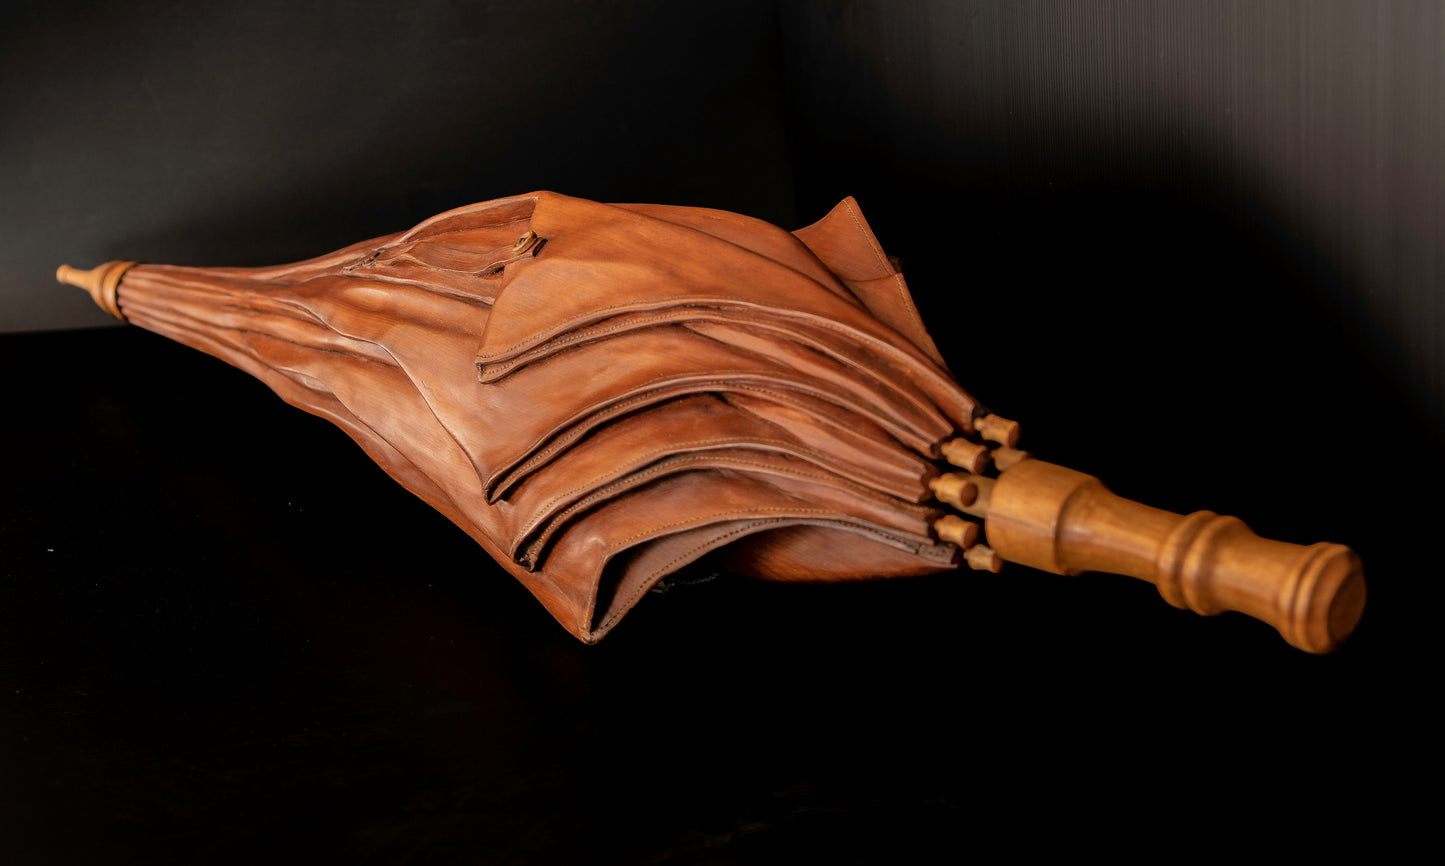 Hand Carved Wooden Umbrella by Kevin McCardell Silver Fern Gallery